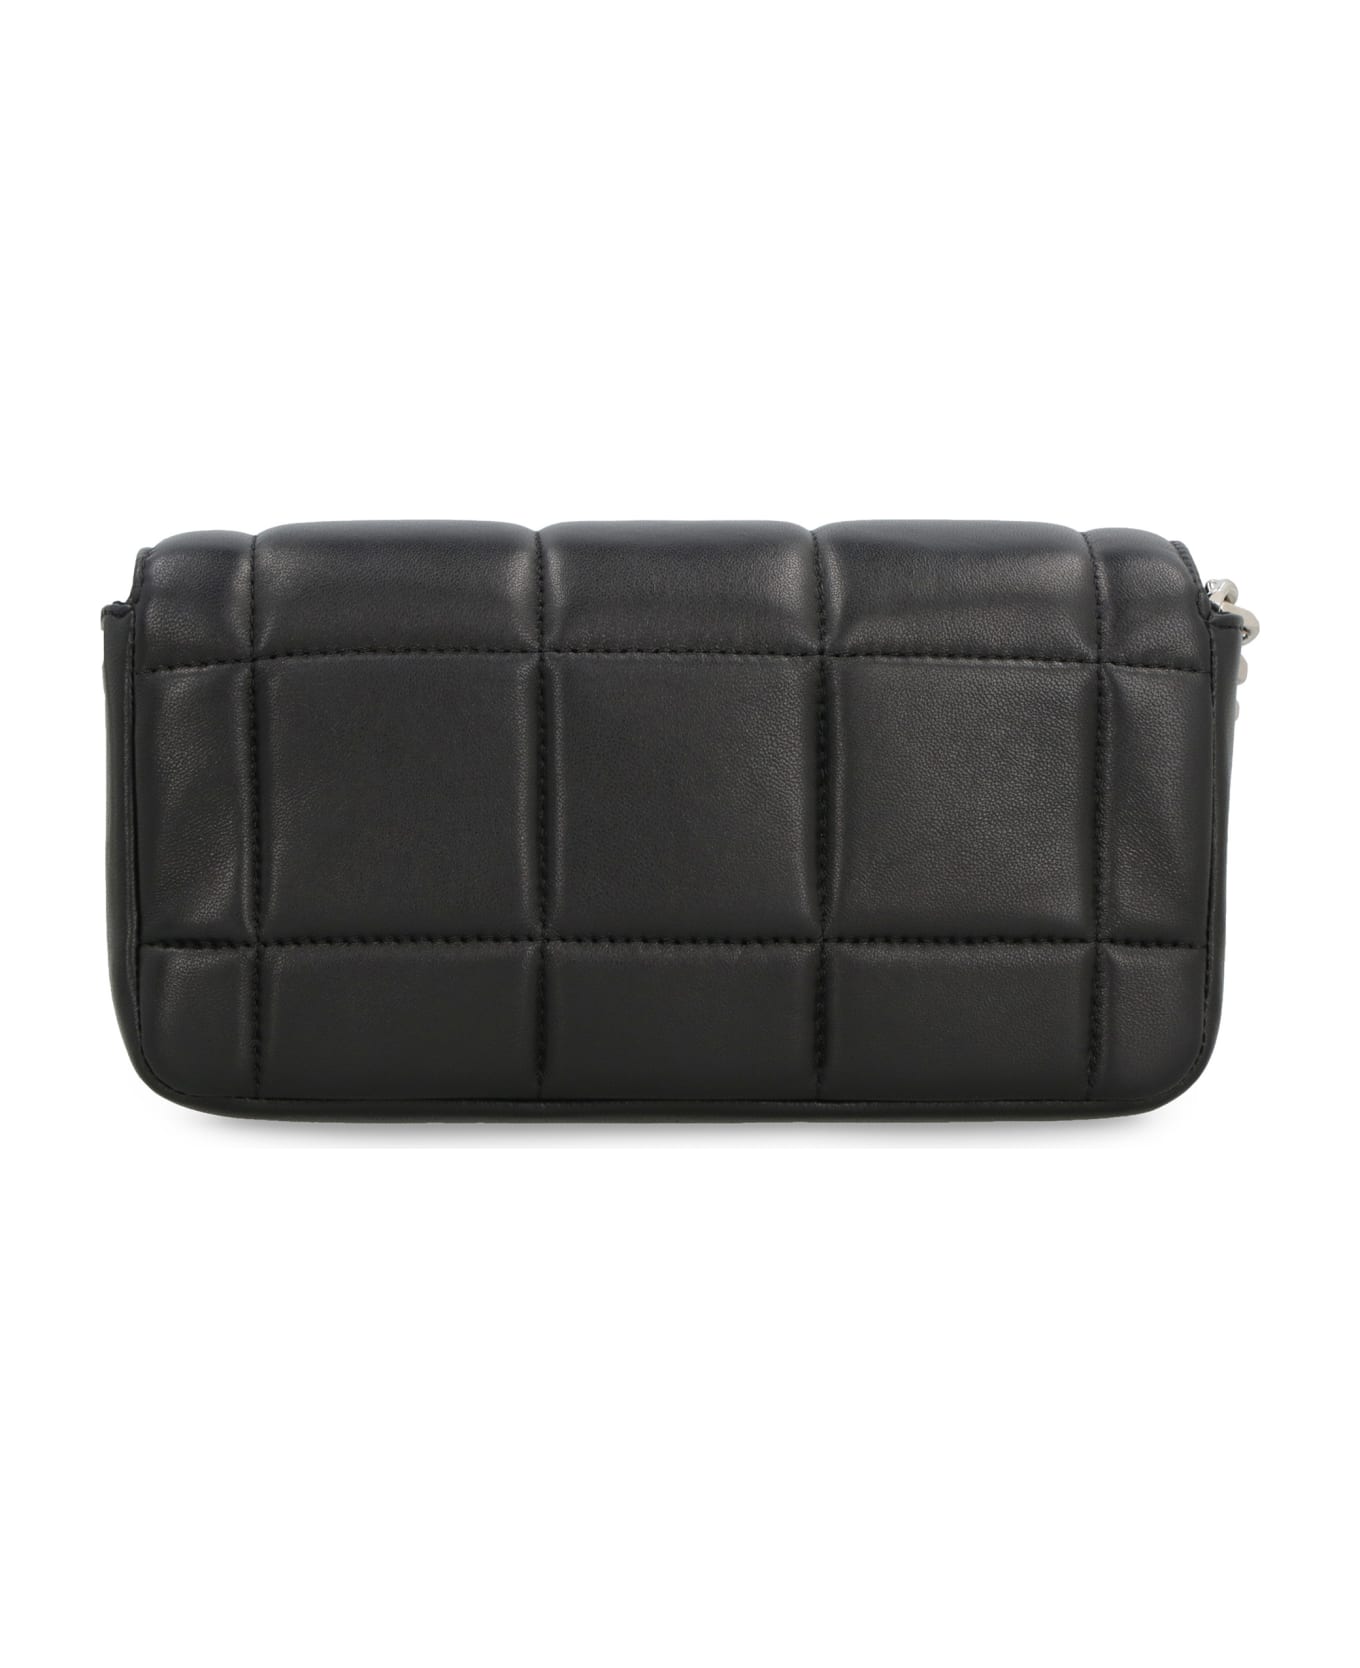 Dsquared2 D2 Statement Leather Clutch - black ショルダーバッグ